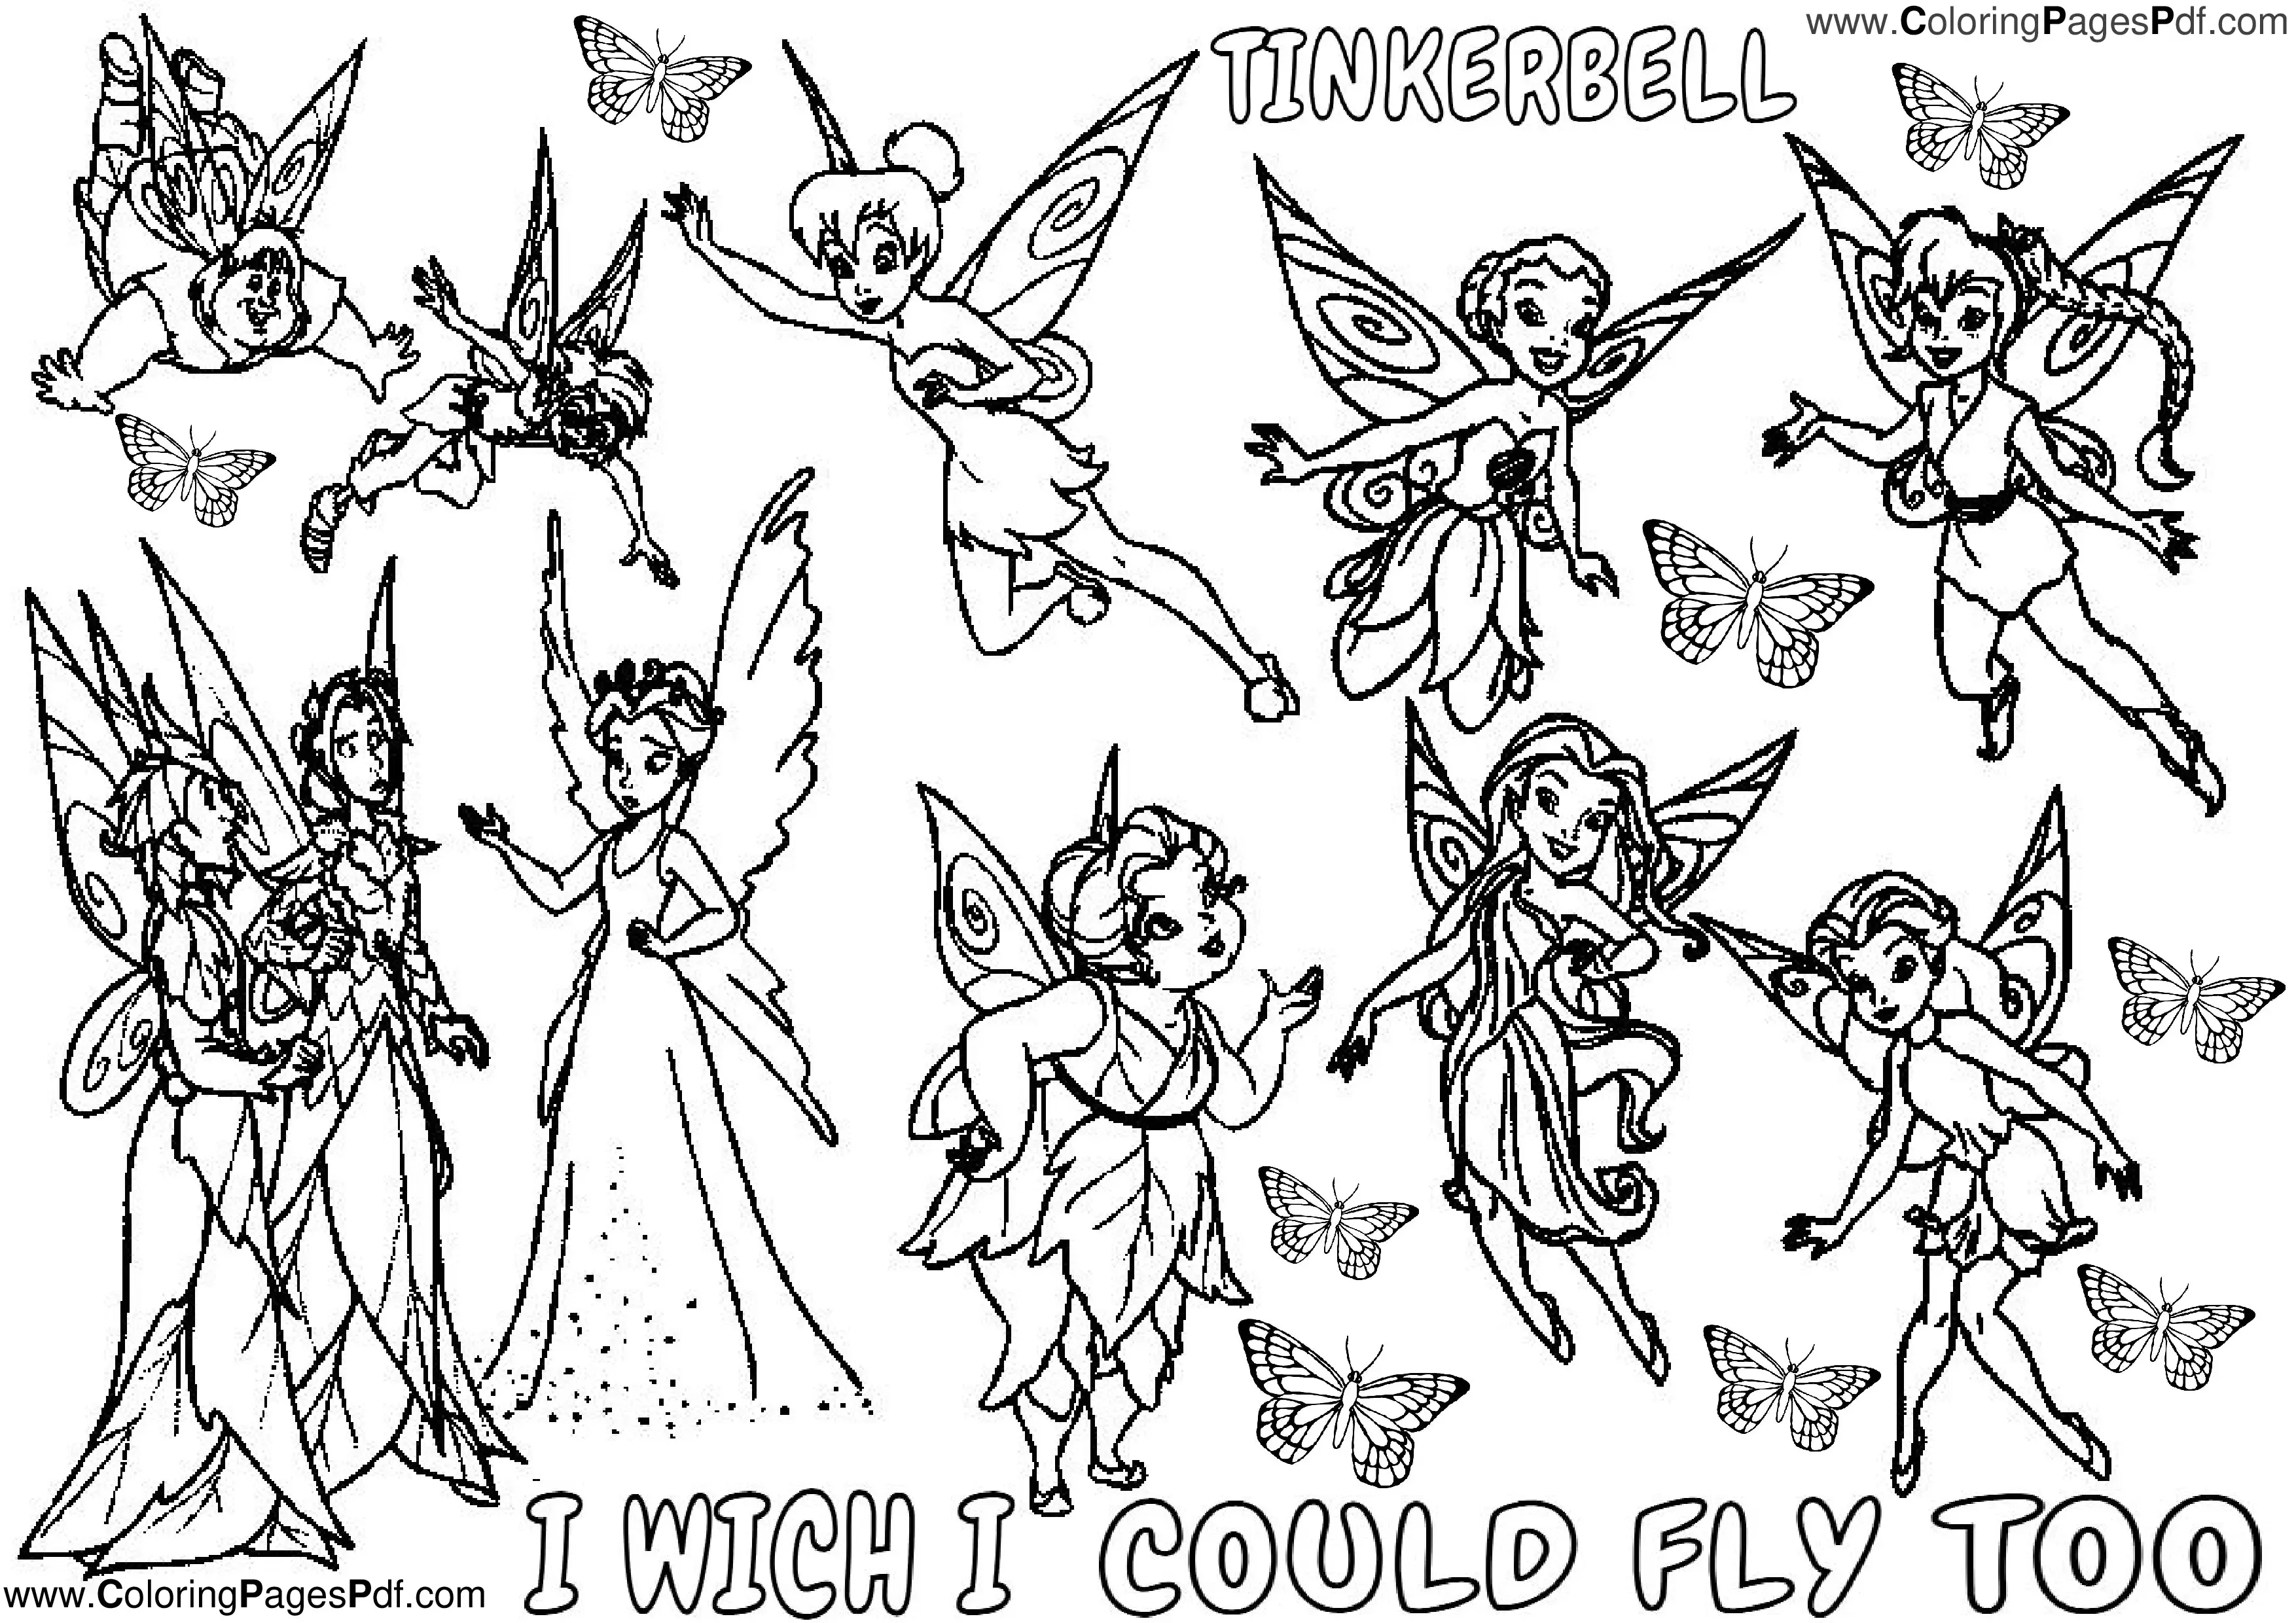 Disney tinkerbell coloring pages